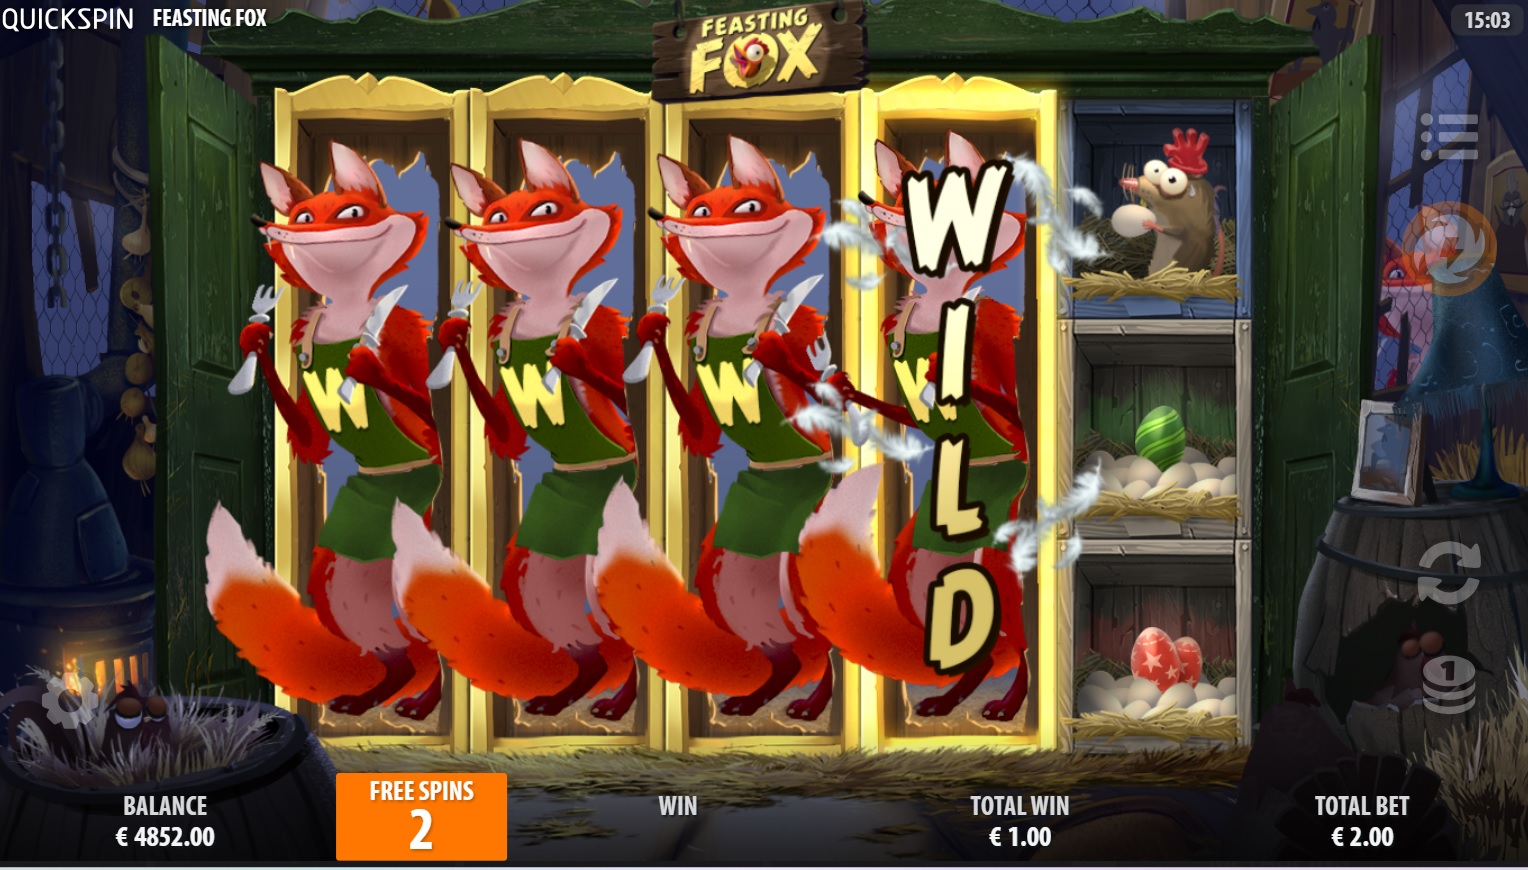 Feasting Fox, Free spins feature